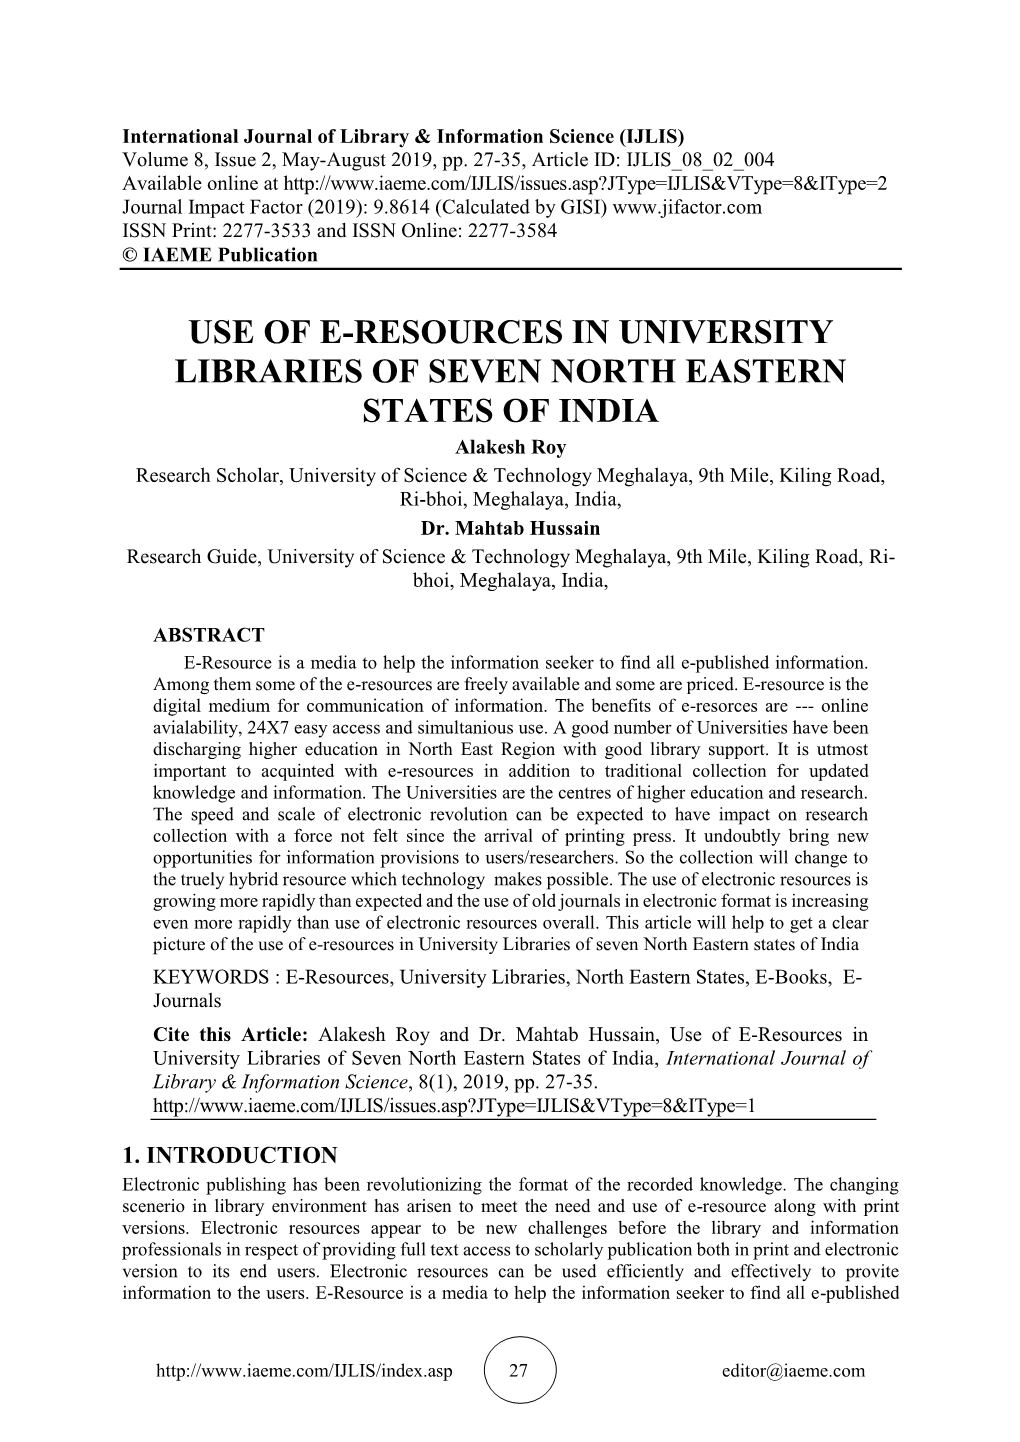 Use of E-Resources in University Libraries Of